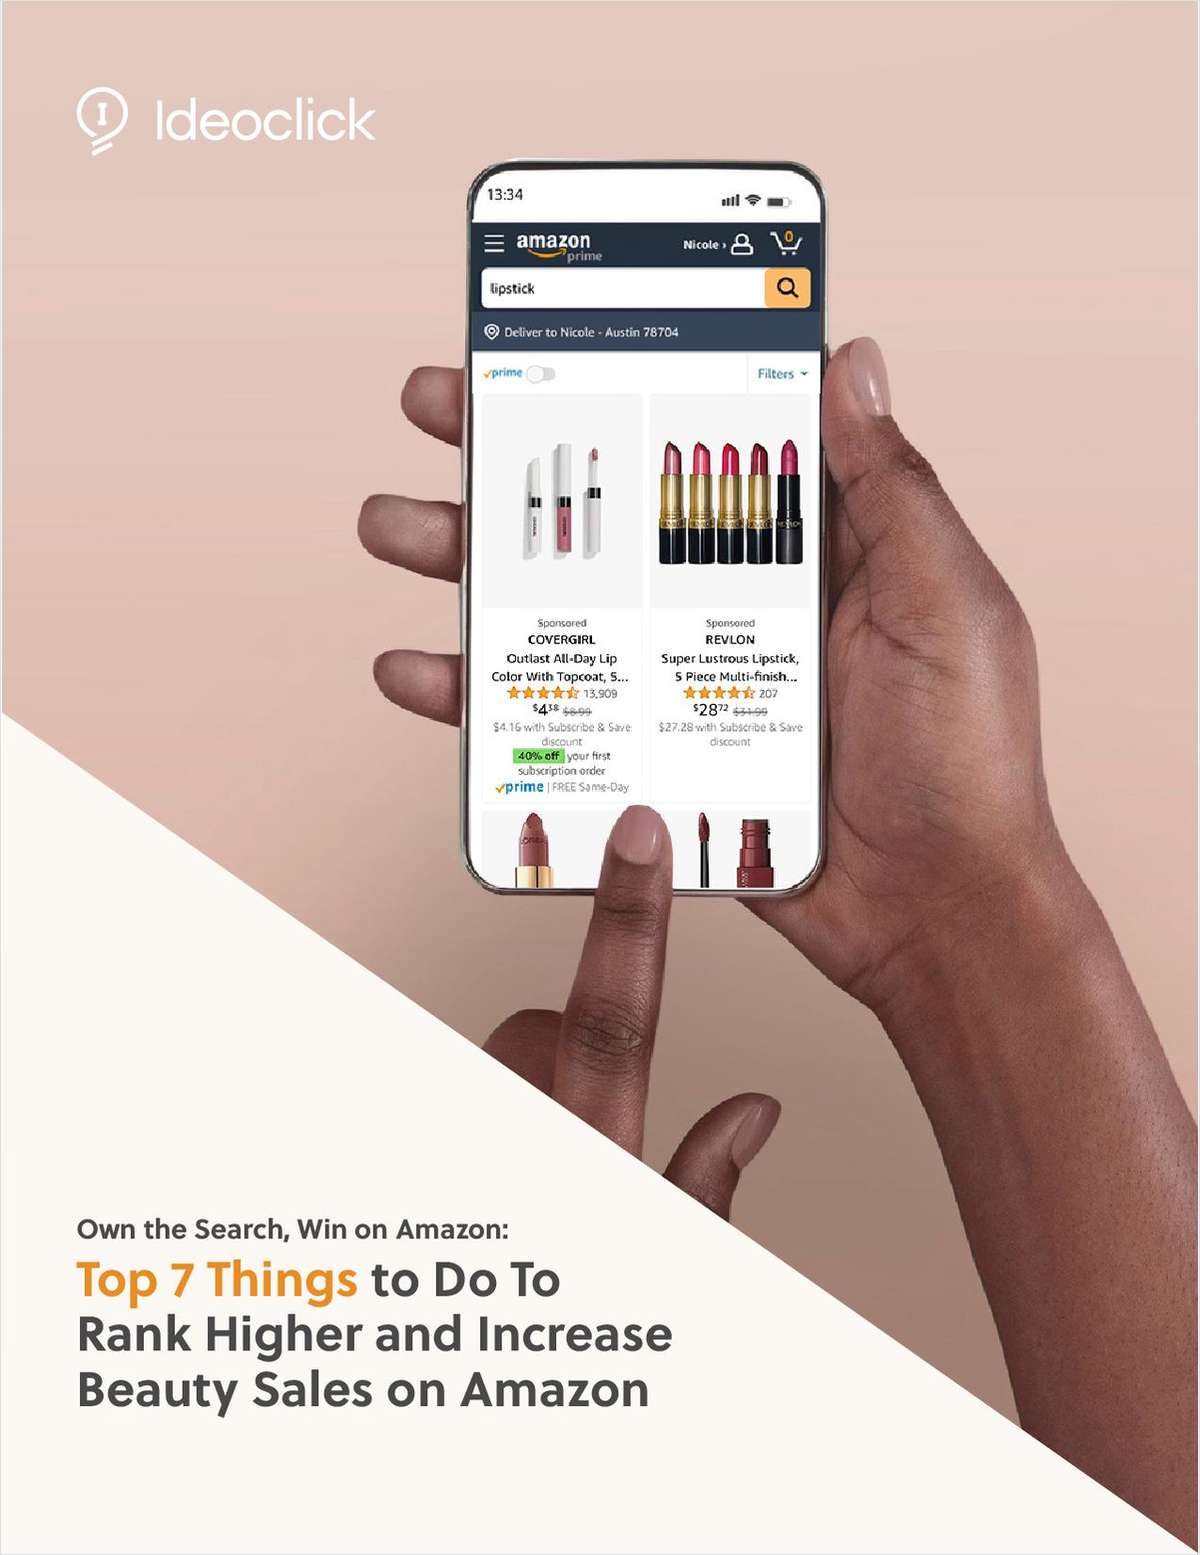 Top 7 Things to Do To Rank Higher and Increase Beauty Sales on Amazon